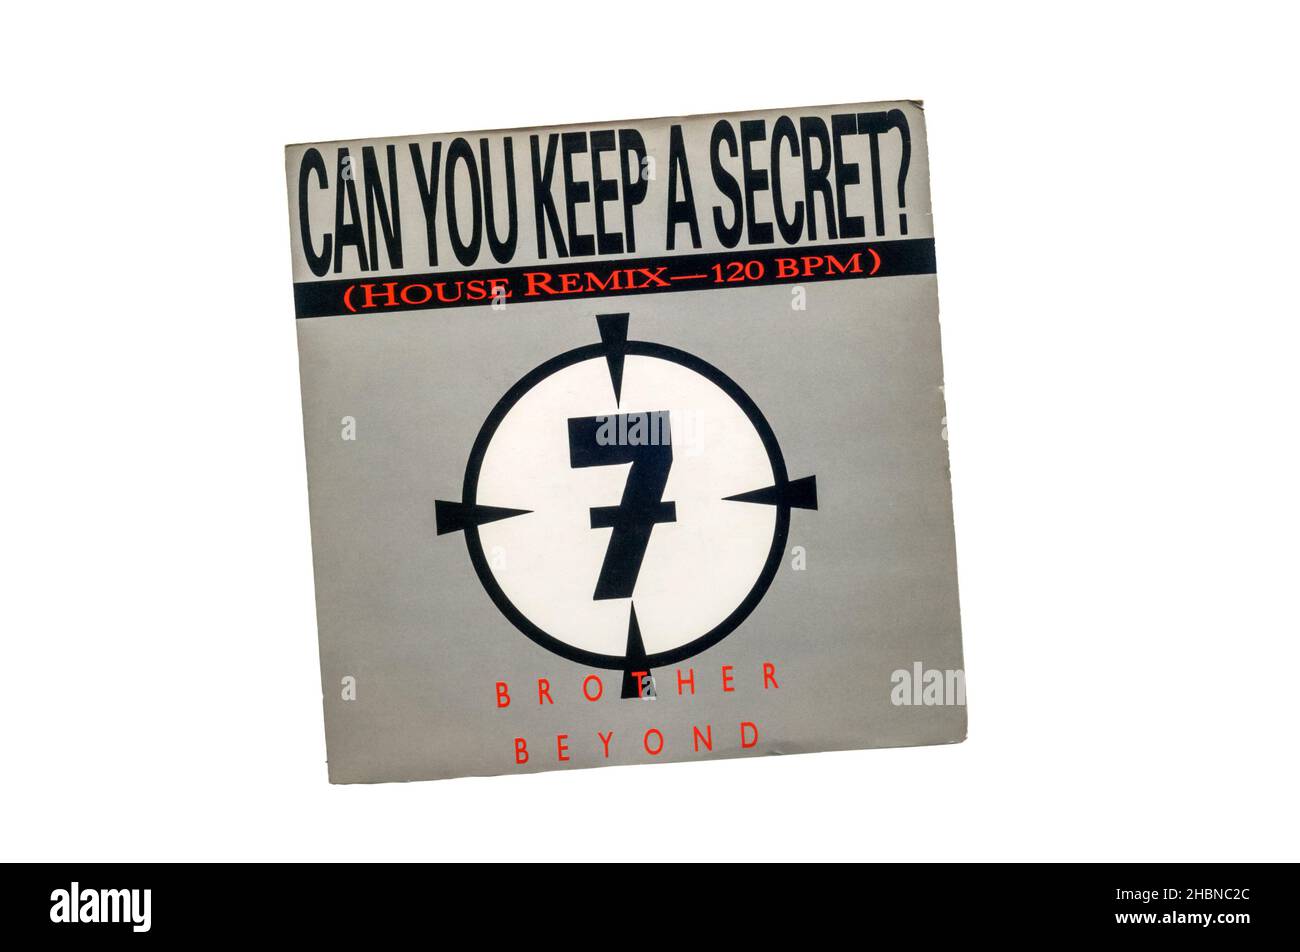 1987 7' single, Can You Keep A Secret? by British boy band Brother Beyond. Stock Photo